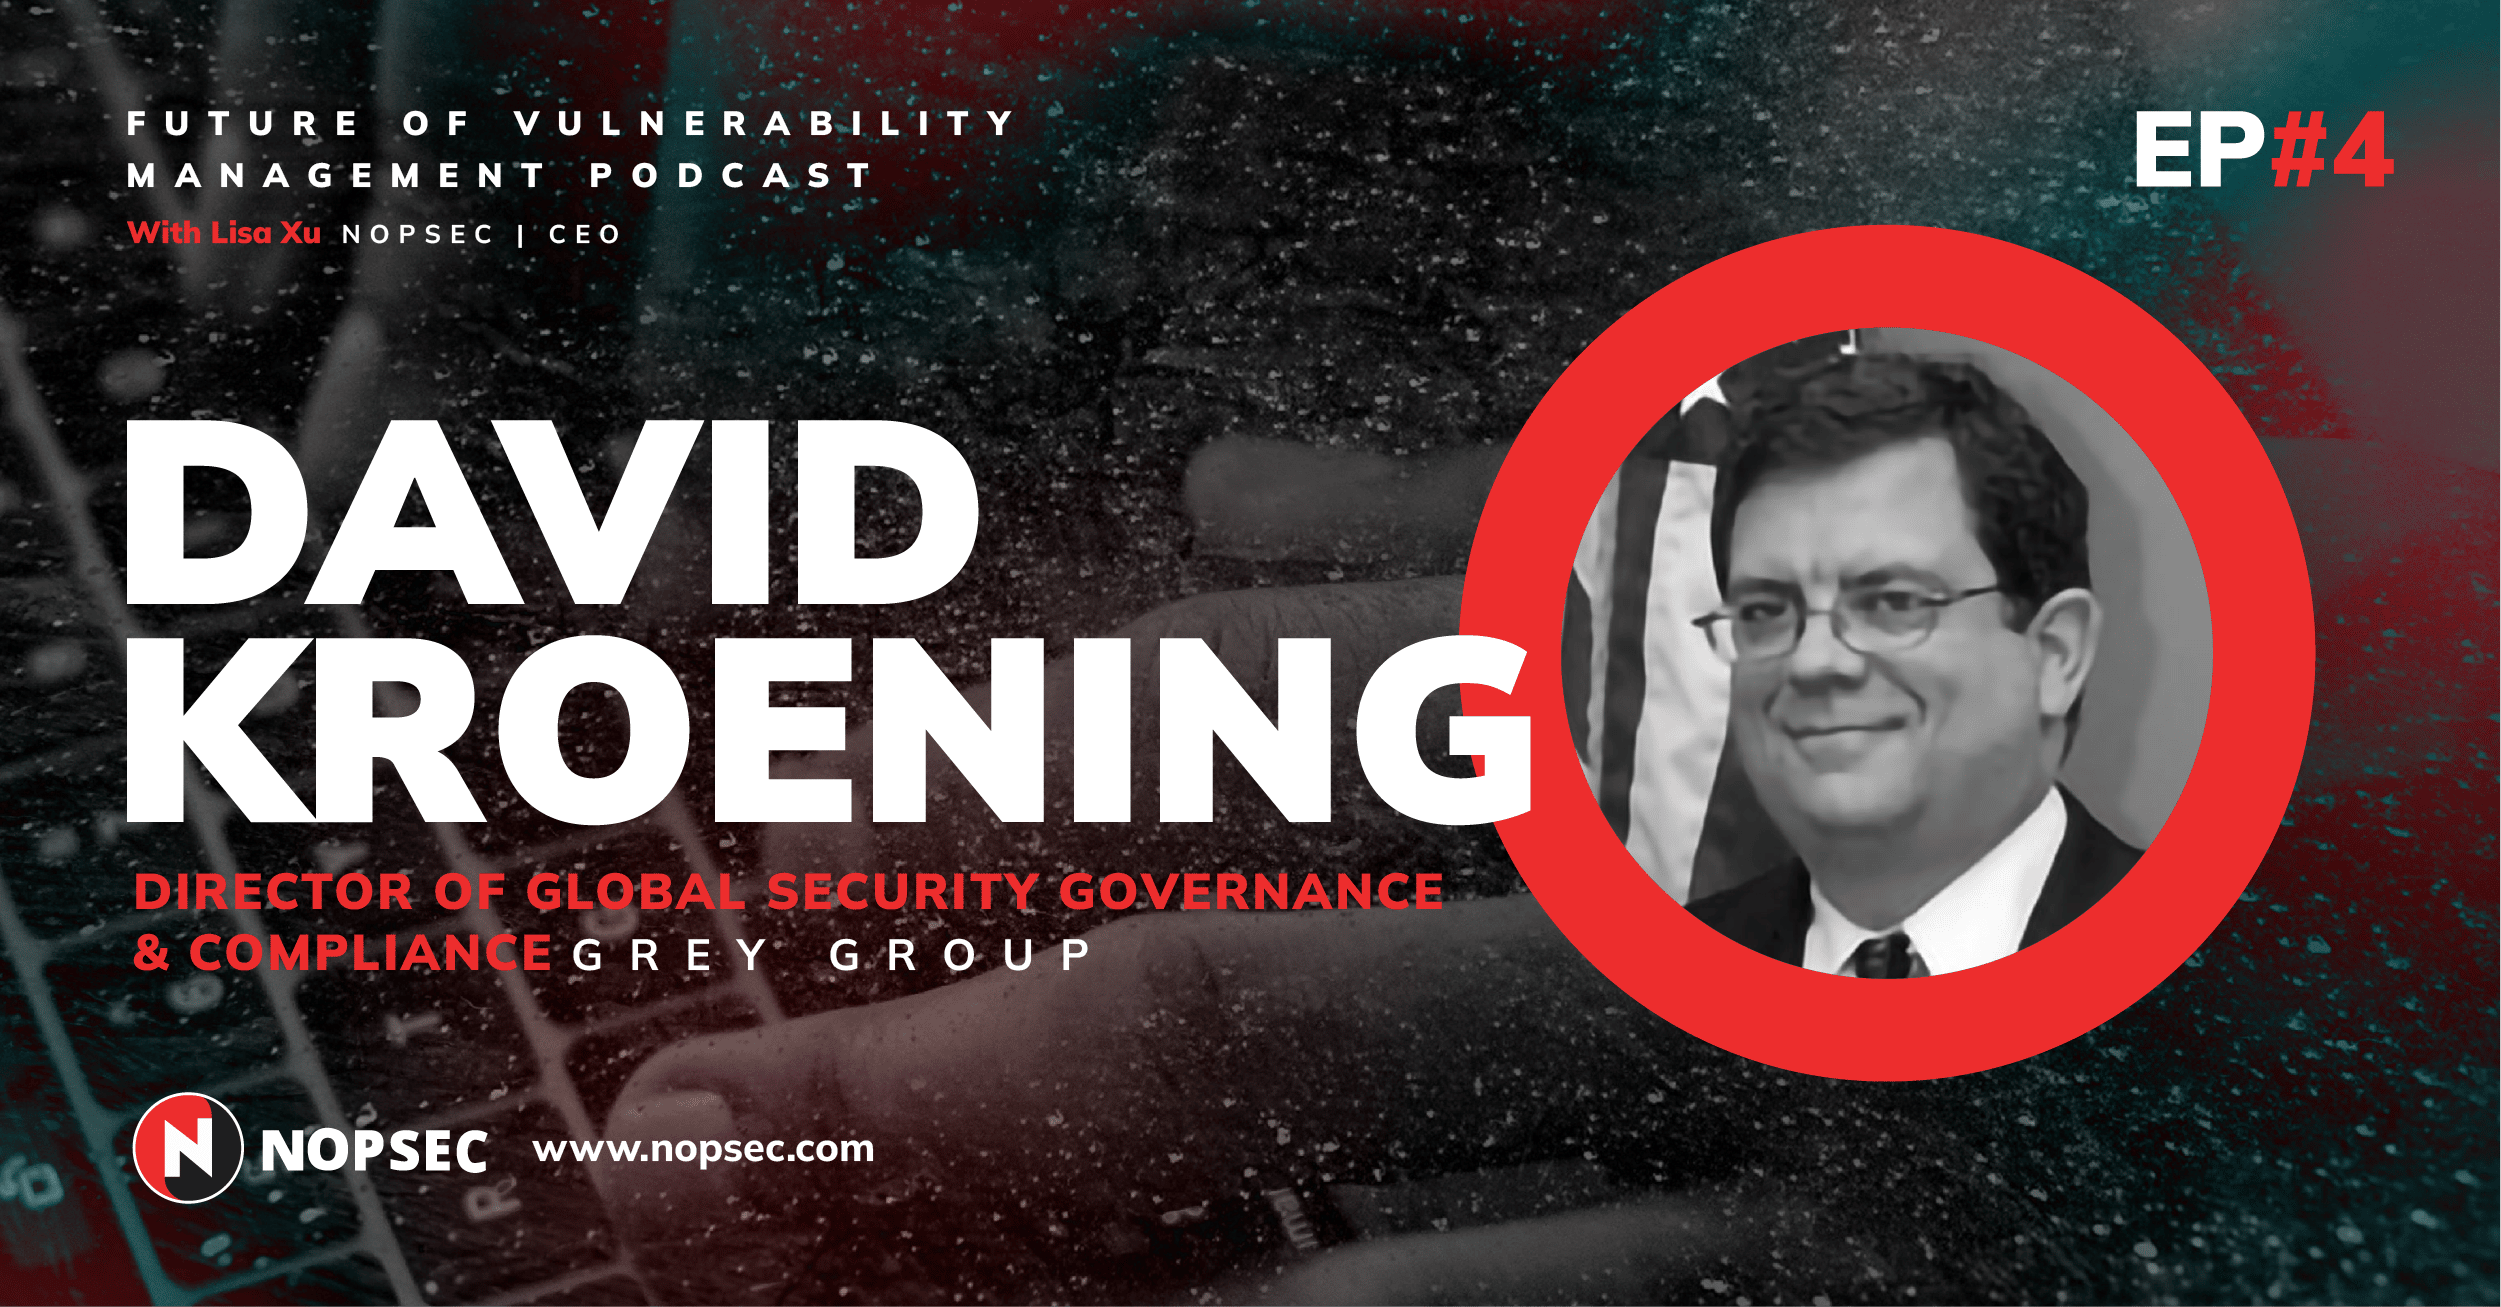 Future of Vulnerability Management Podcast Episode 4 Featuring David Kroening